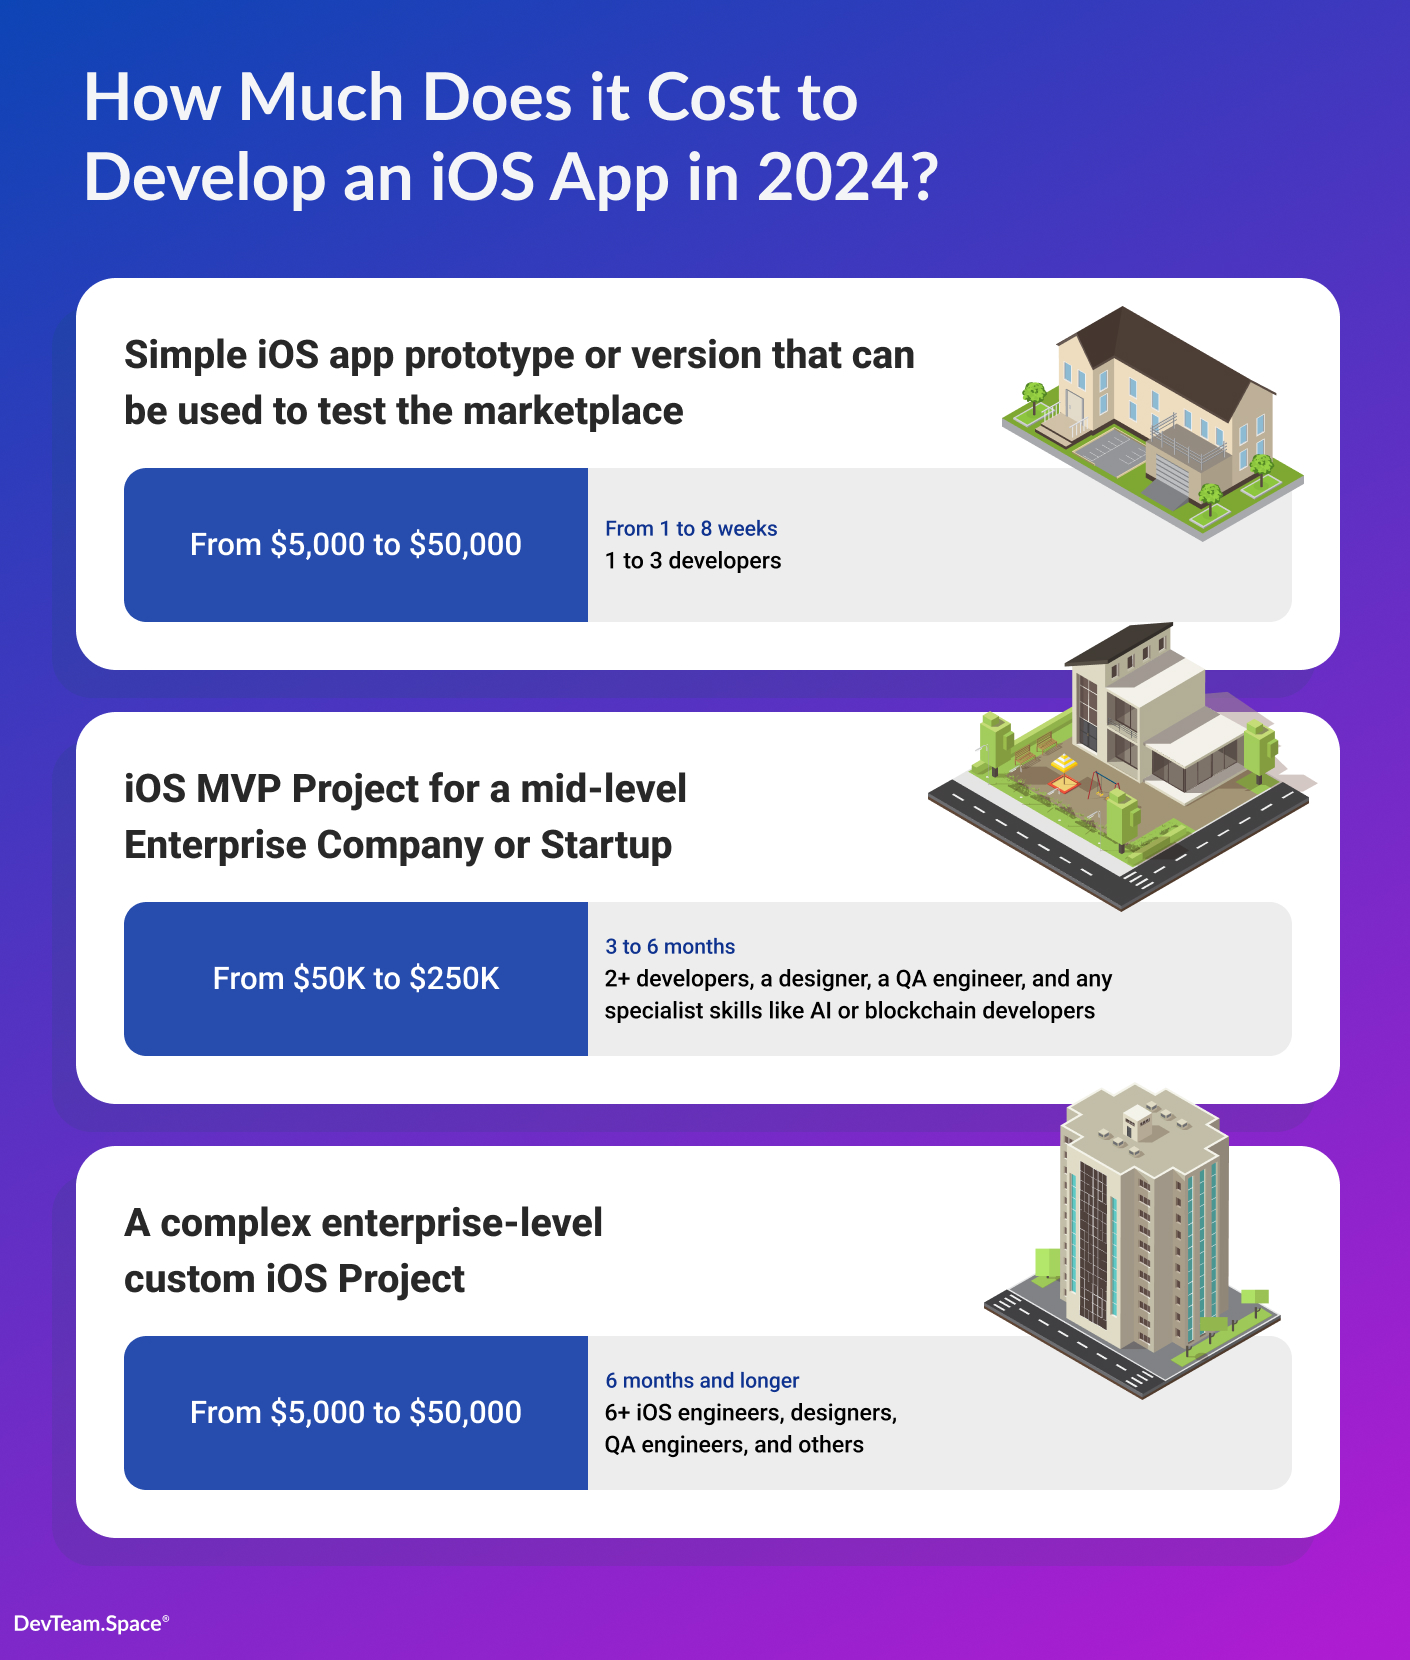 Image has the text how much does it cost to develop an iOS app and includes 3 examples, a simple ios app, an ios mvp, and a complex enterpirse level ios app with images of each example.